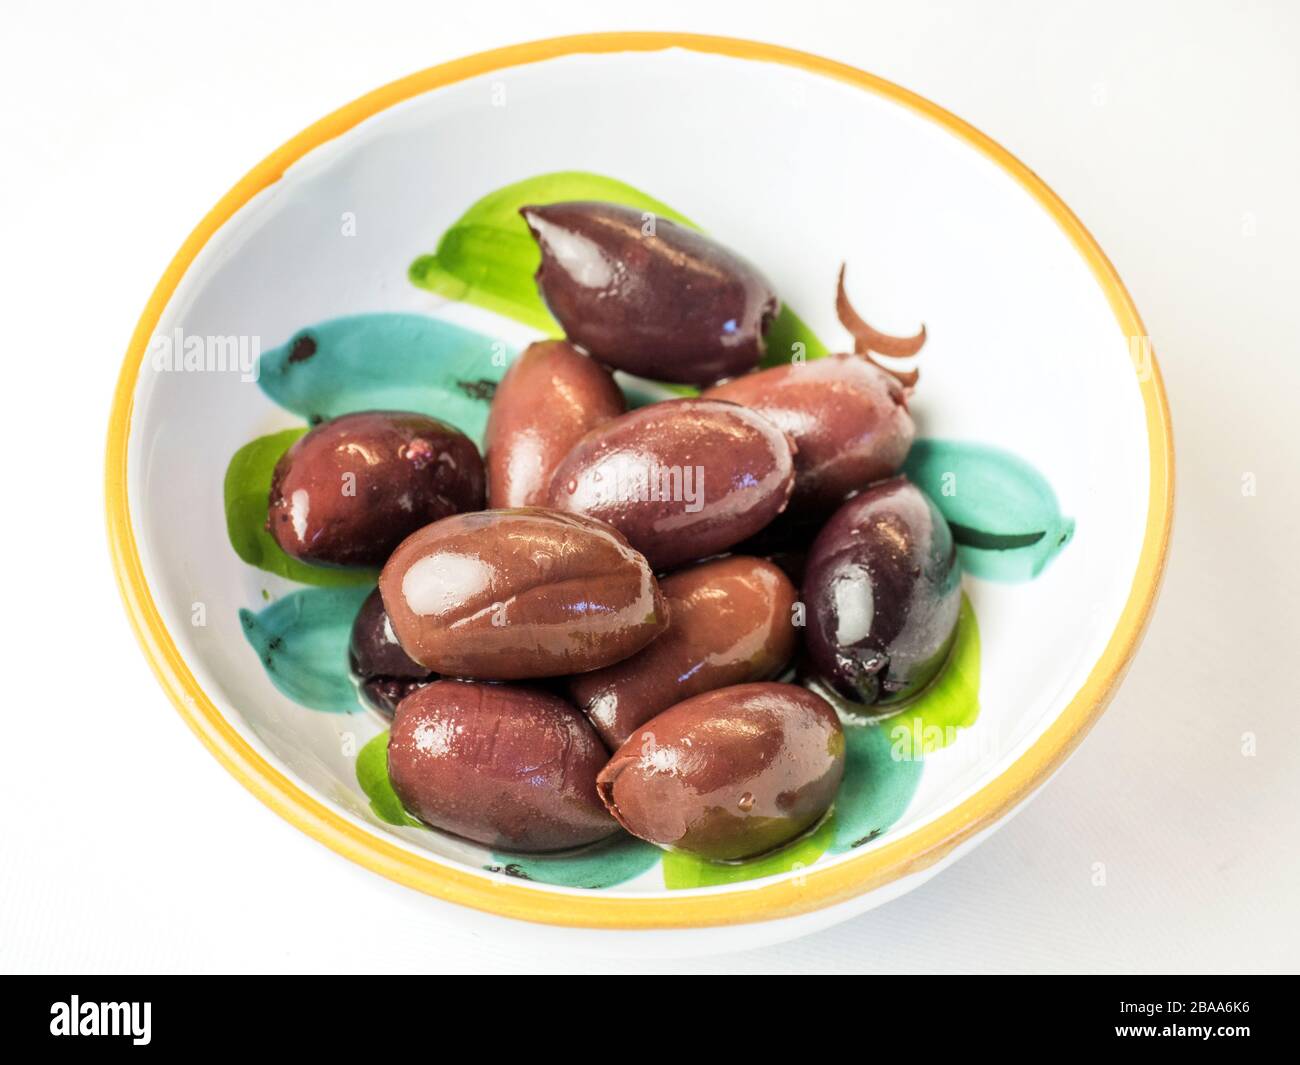 Kalamata olives in a bowl on a white tablecloth Stock Photo